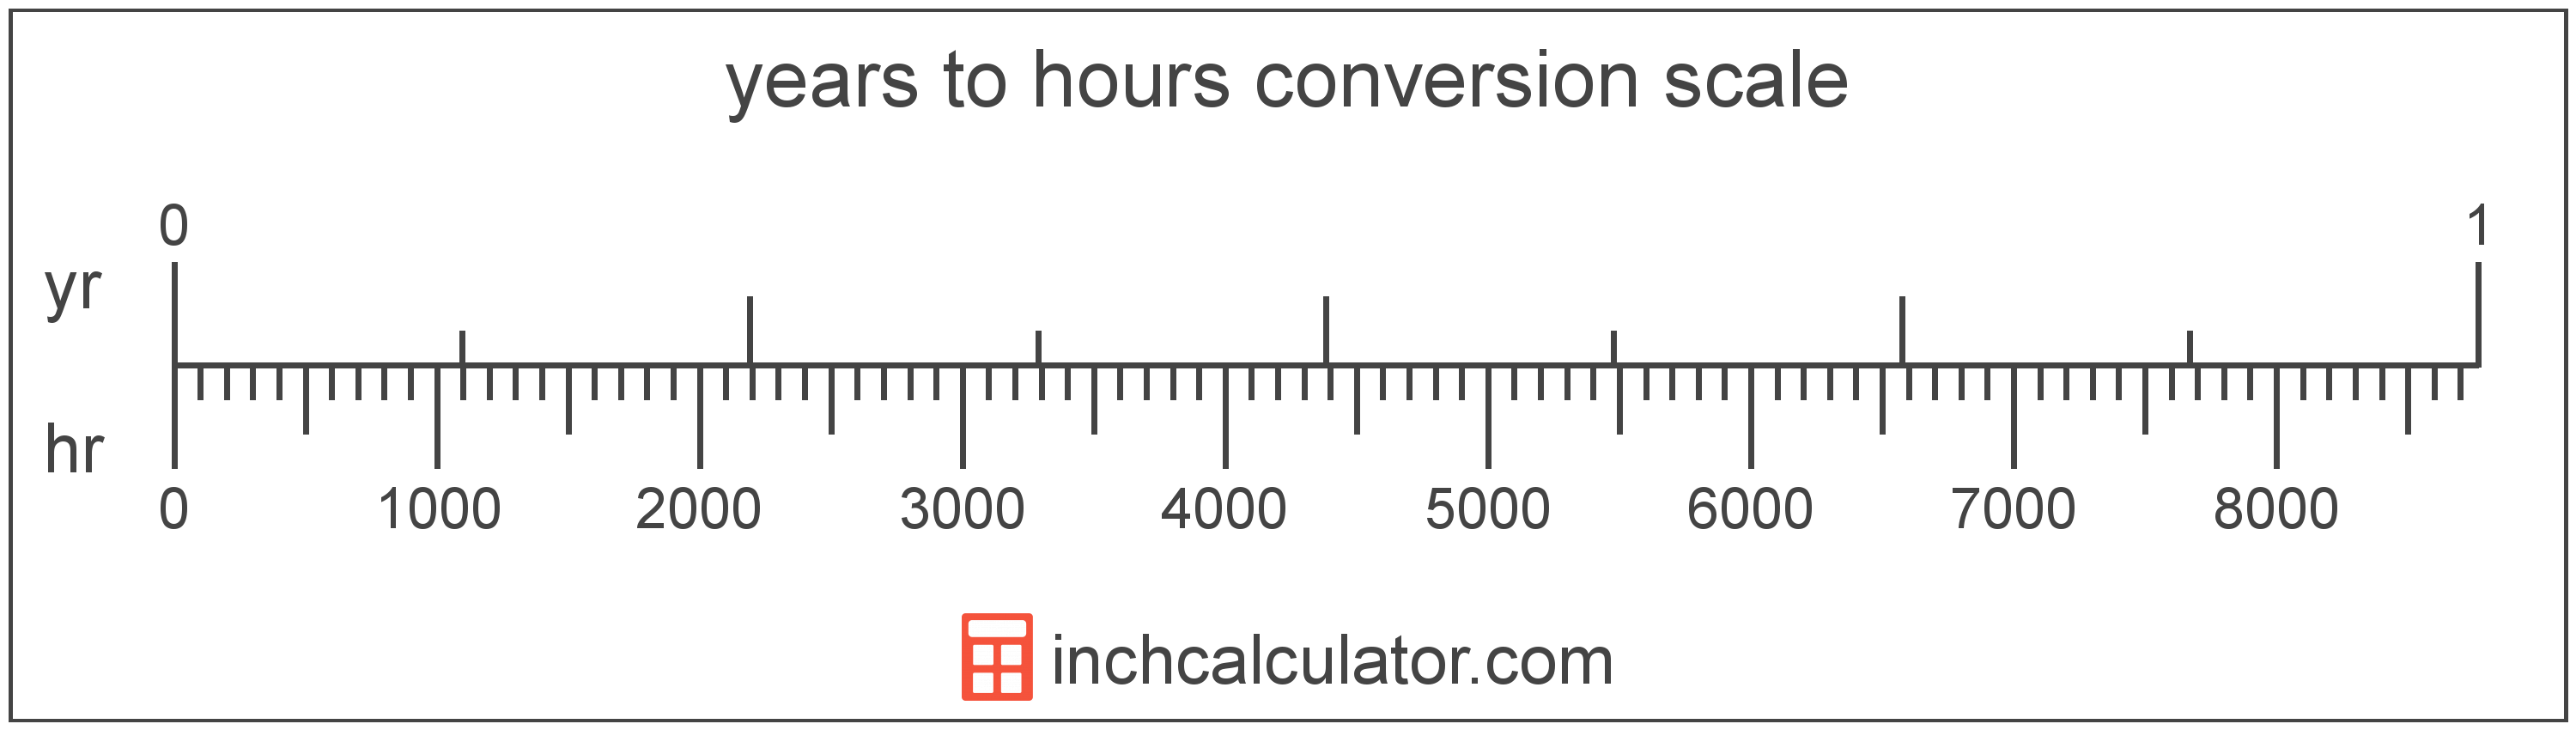 conversion scale showing years and equivalent hours time values